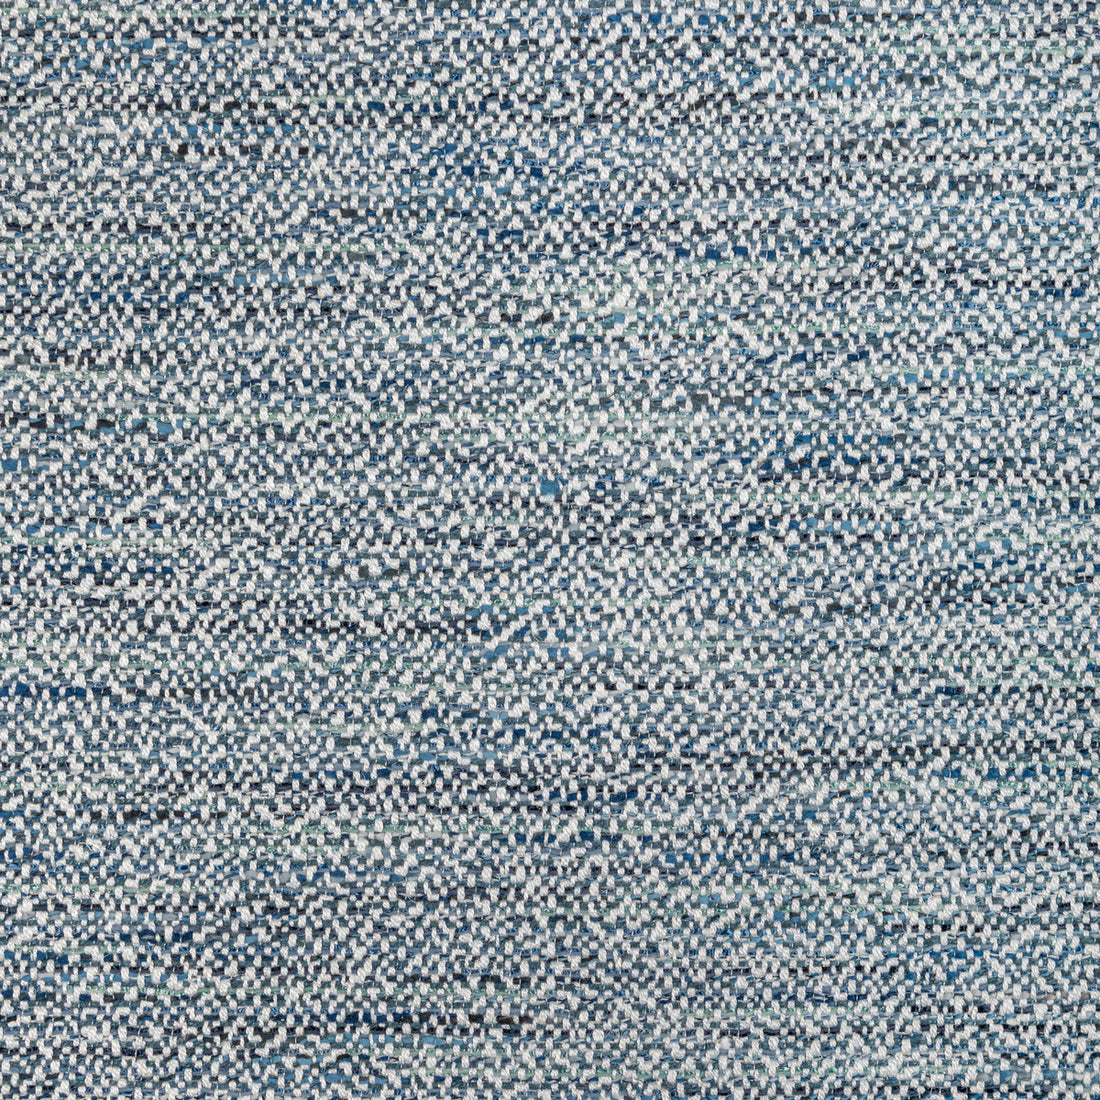 Variance fabric in indigo color - pattern 36333.5.0 - by Kravet Couture in the Modern Luxe III collection